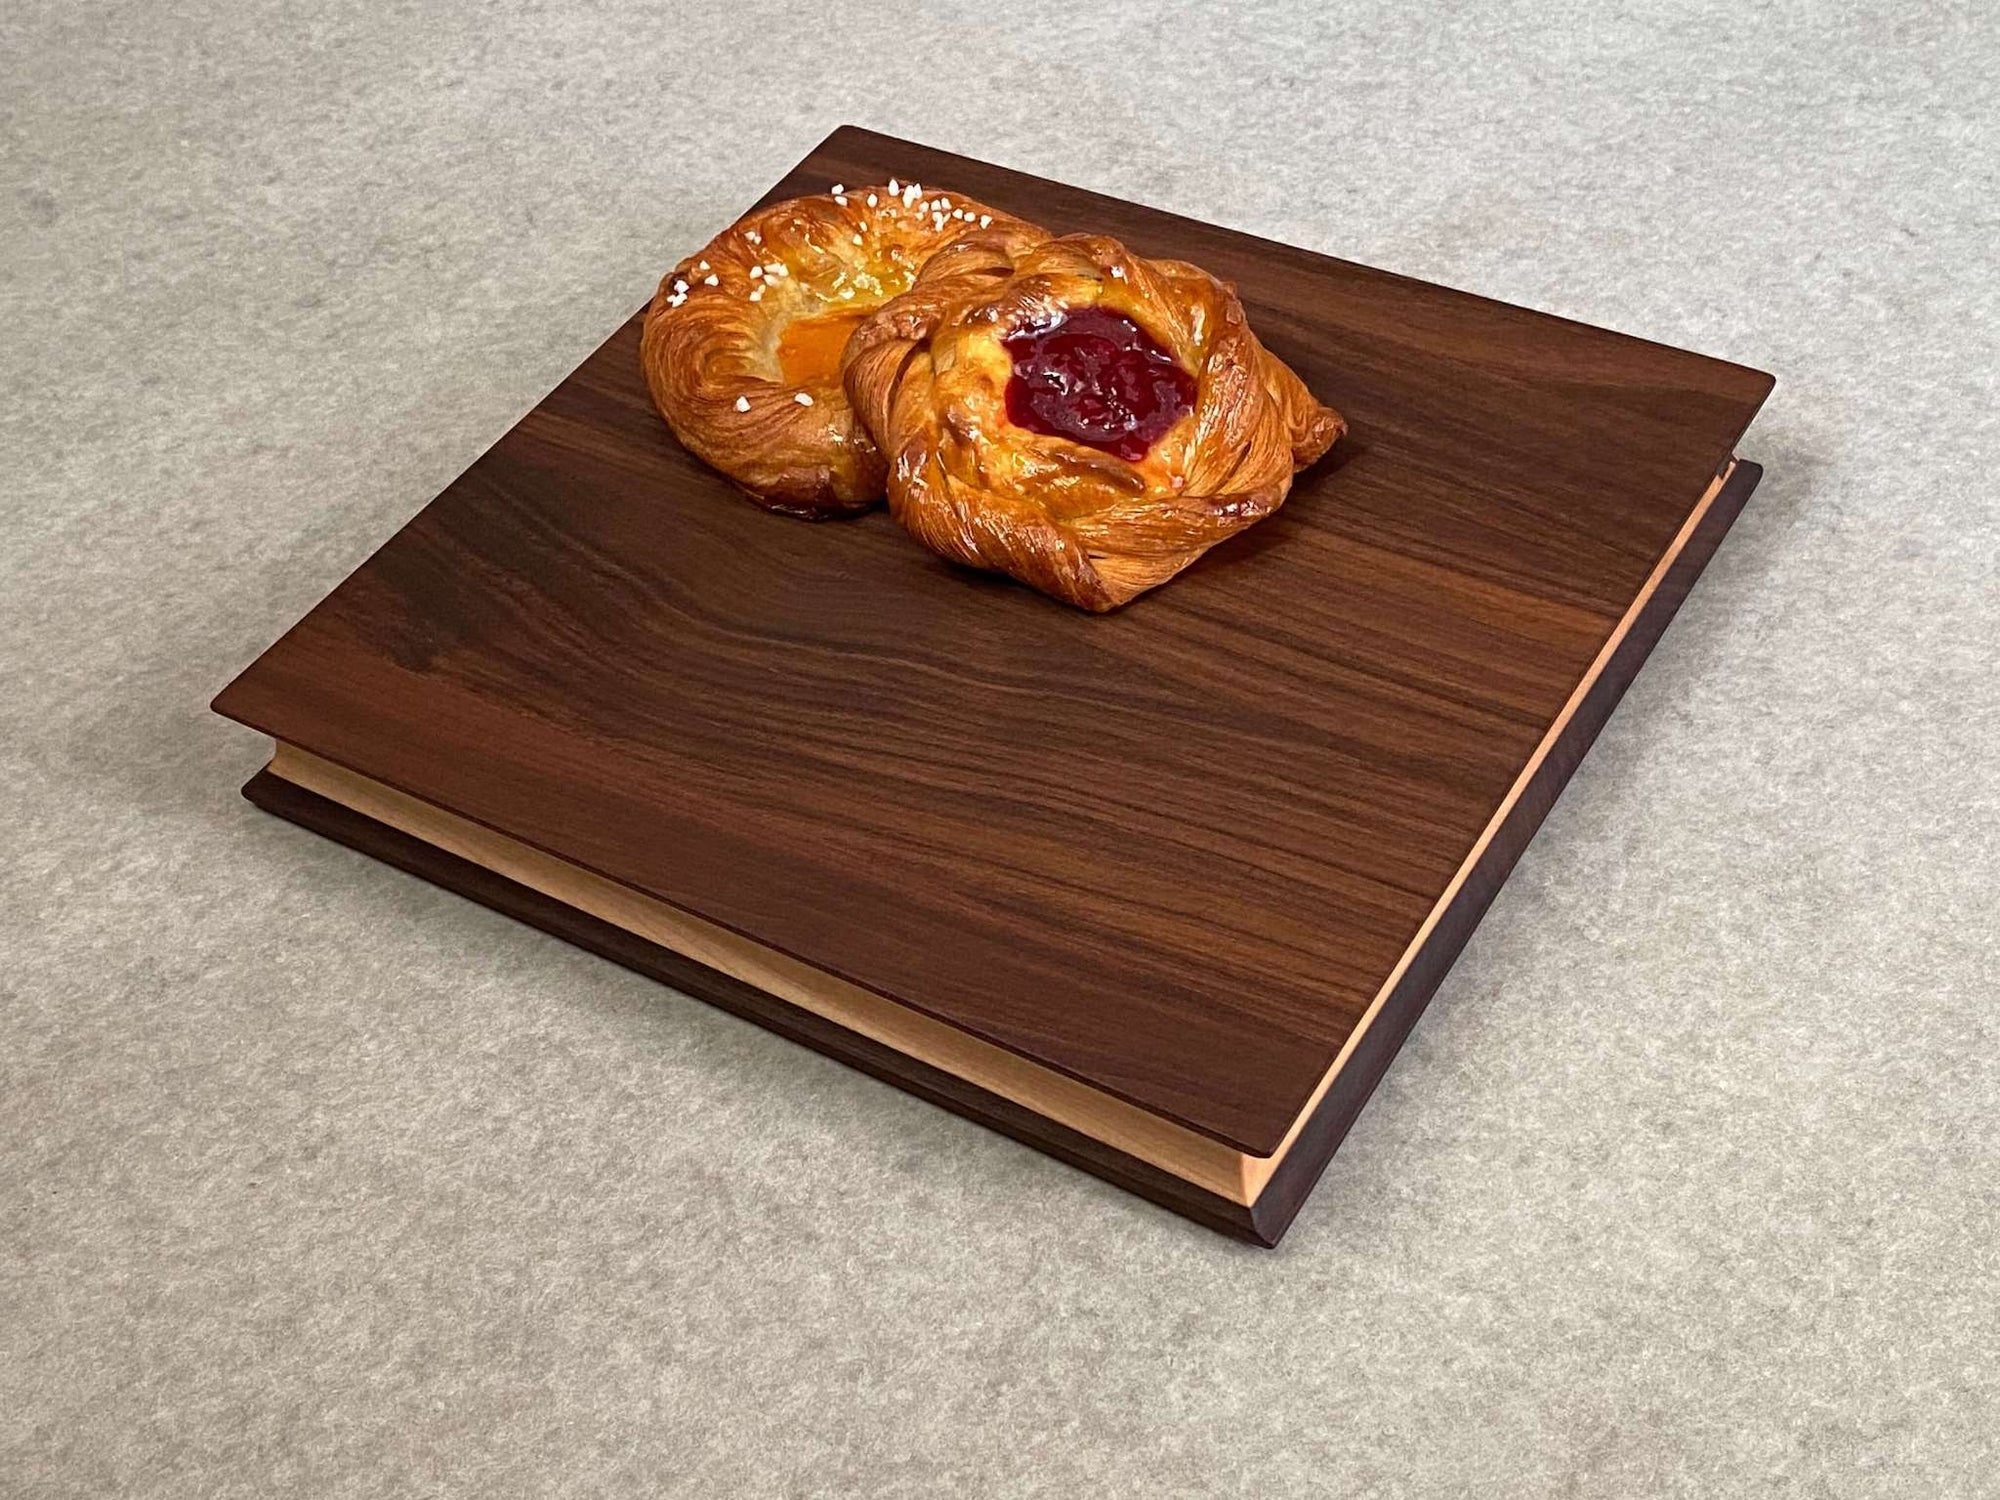 A square cutting and serving board of maple sandwiched between two thin layers of walnut. Sculpted edges provide comfortable fingerholds.